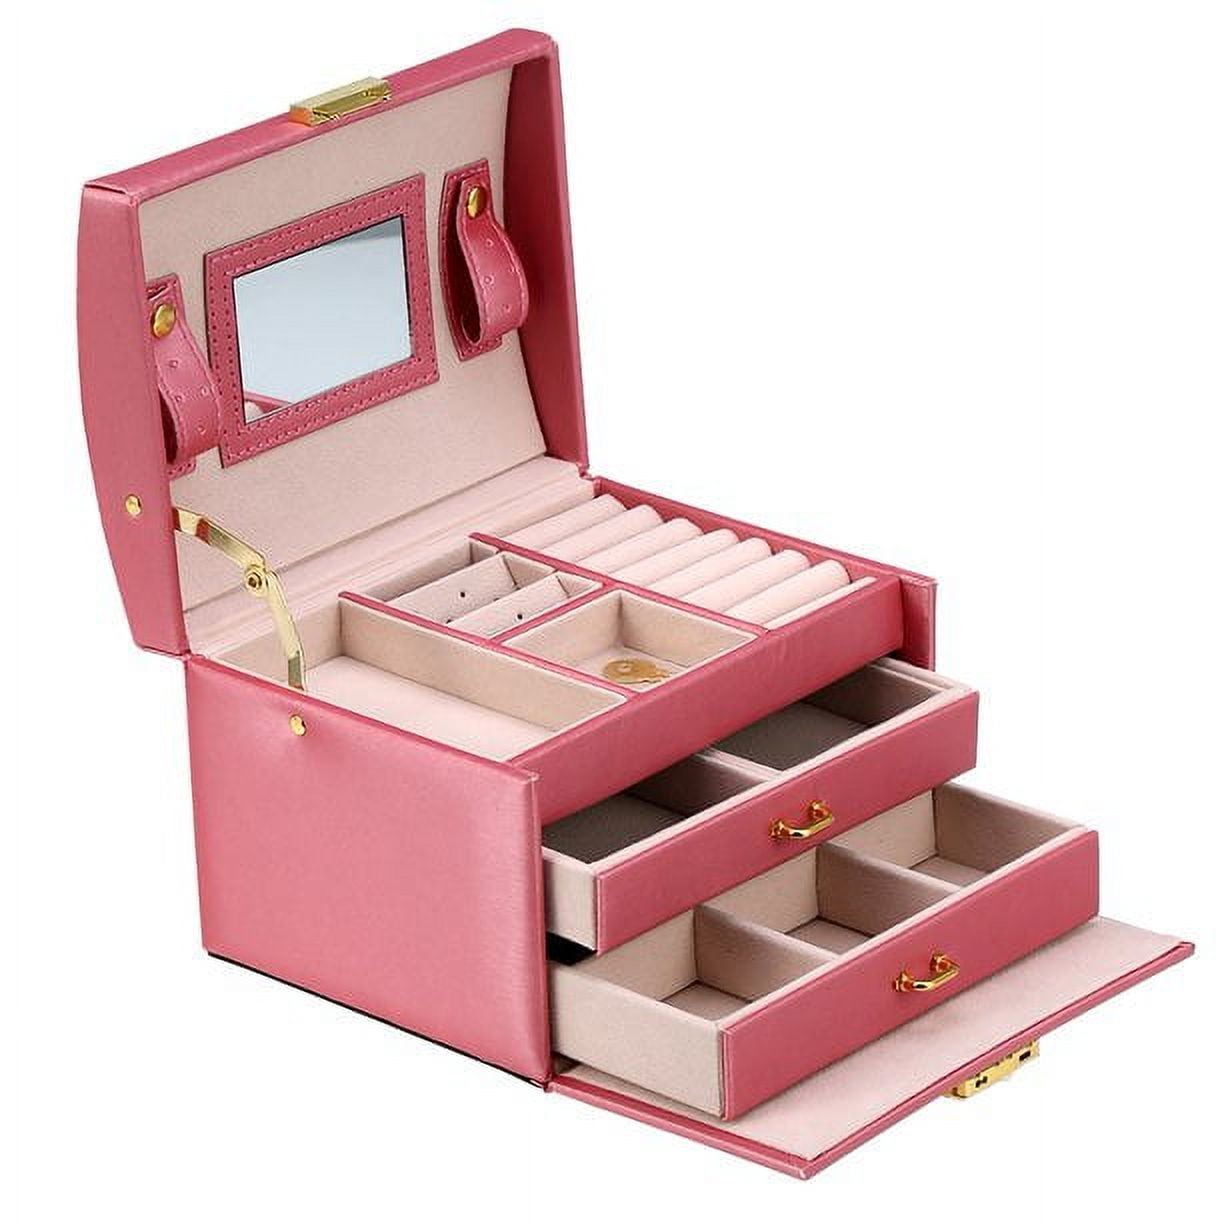  DECOR4SEASON PU Leather Jewelry Box Organizer with 2 Layer  Display Storage Cases and Removable Tray for Necklace, Earrings, Rings,  Bracelets for Women Girls Gift, Pink : Clothing, Shoes & Jewelry